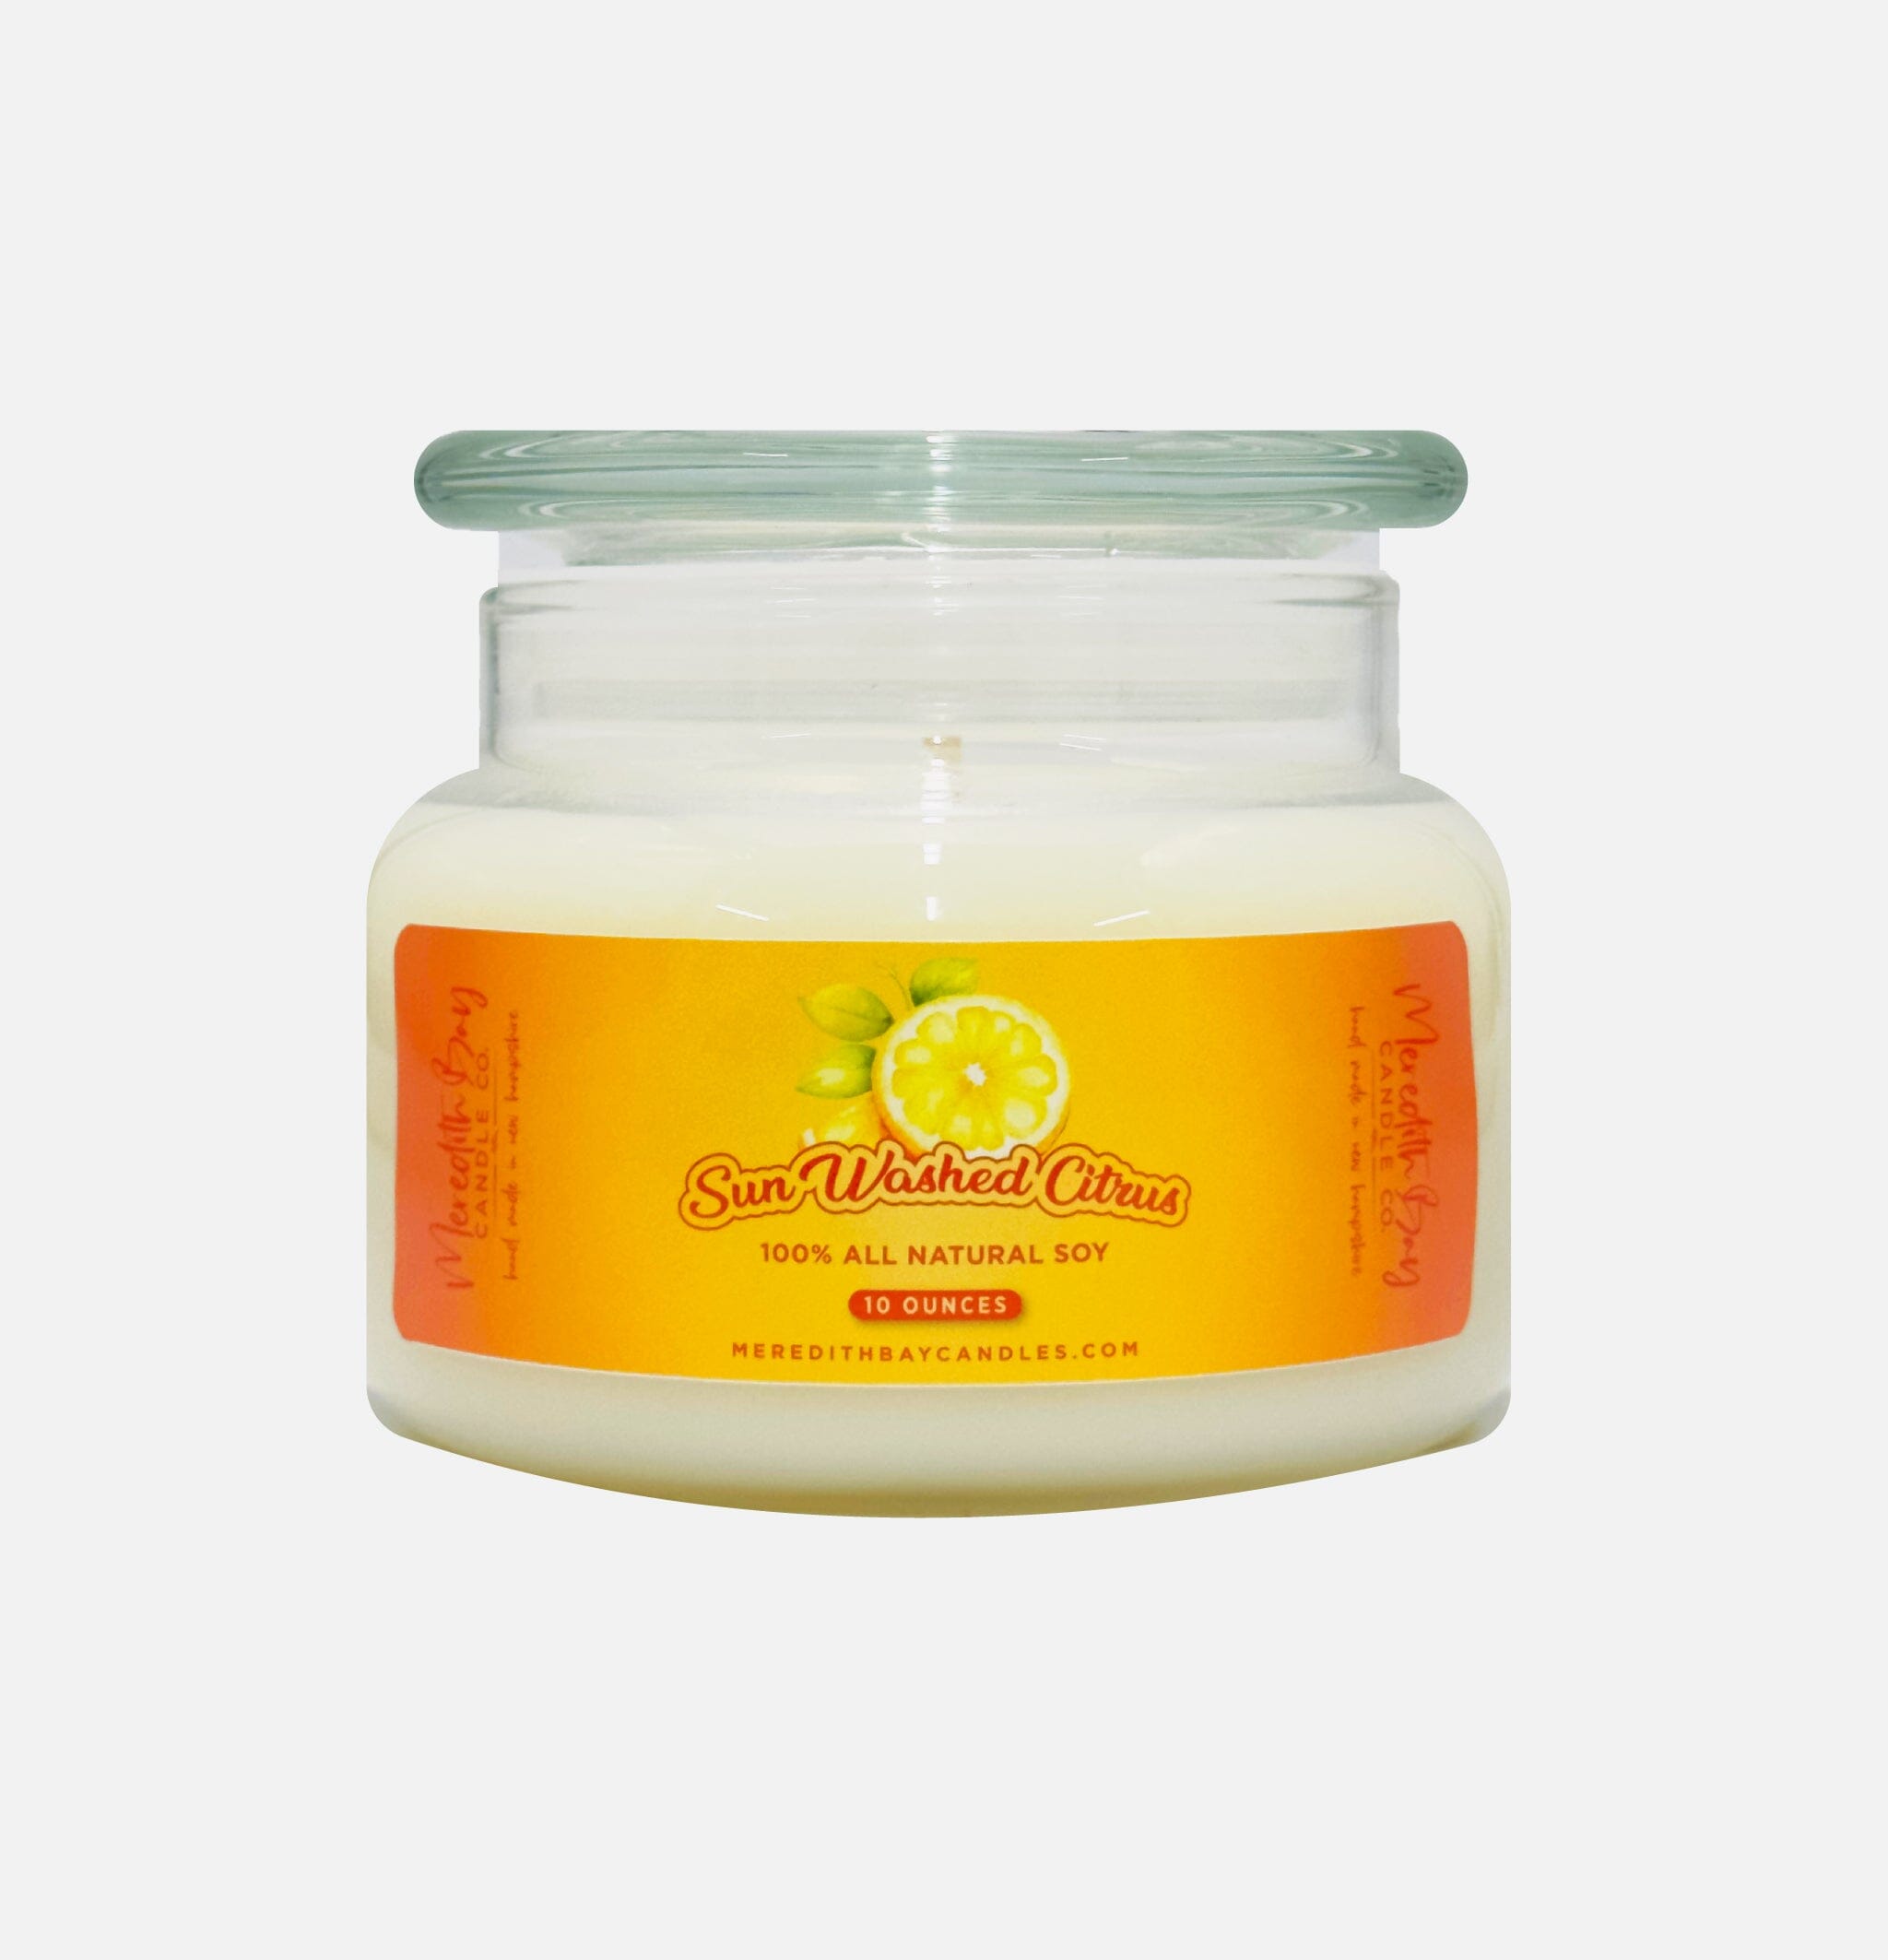 Sun Washed Citrus Soy Candle Meredith Bay Candle Co 10 Oz 